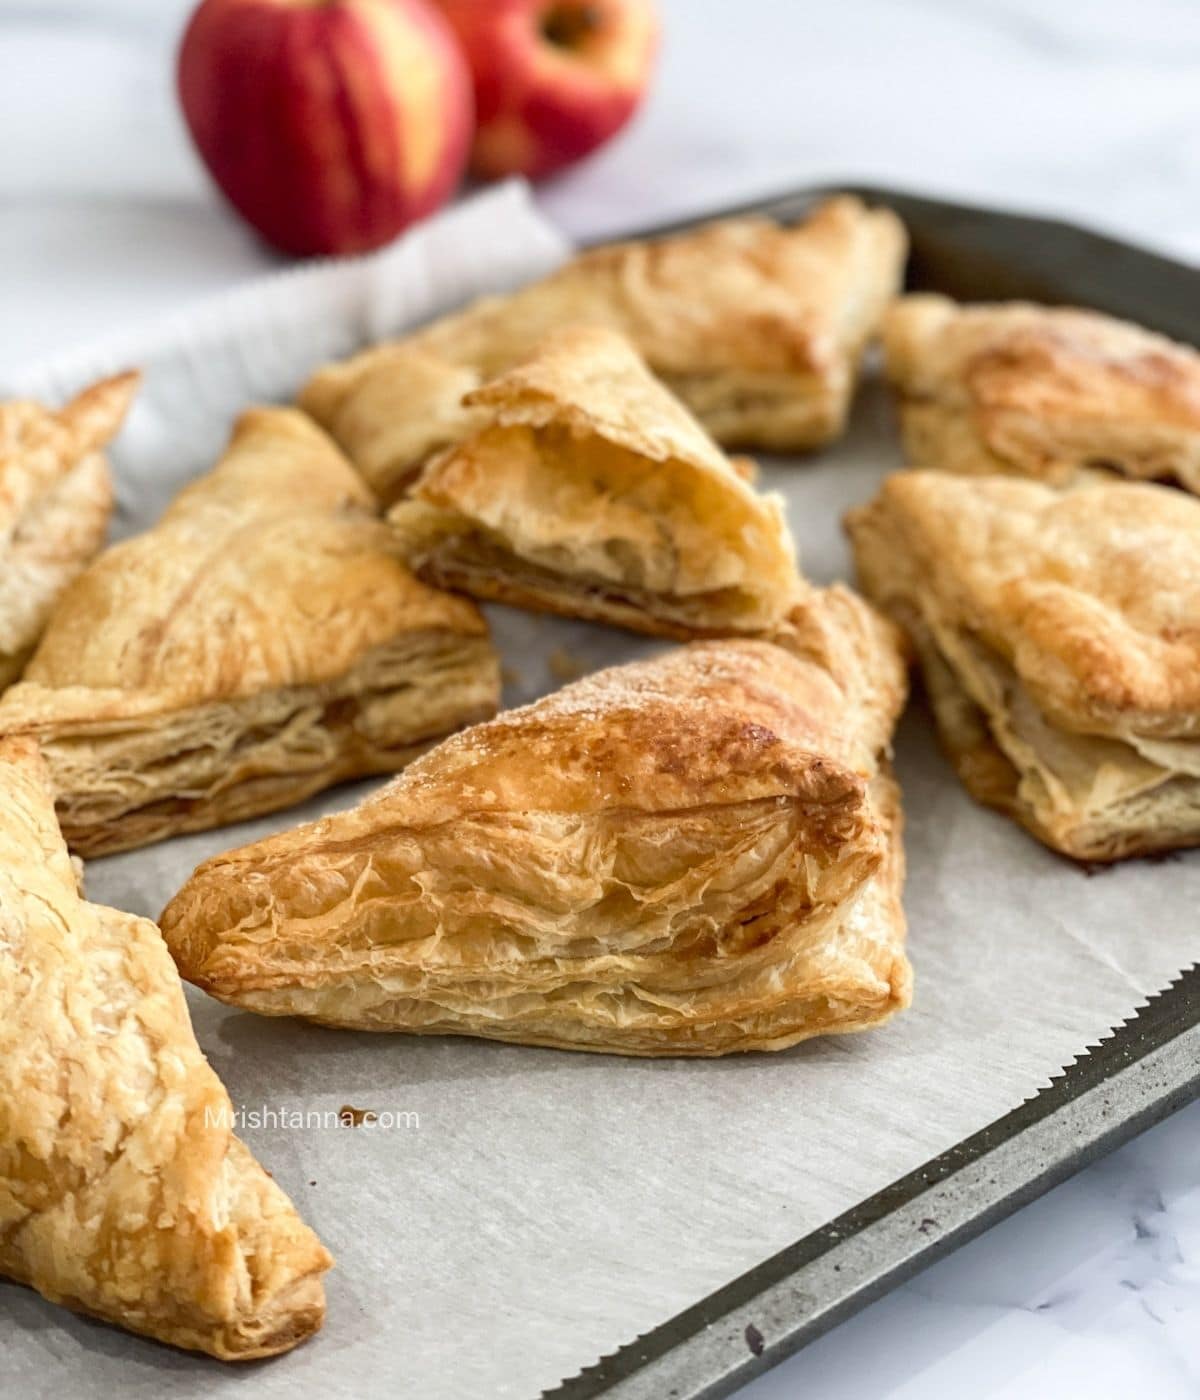 baking tray is with air fried apple turnovers.